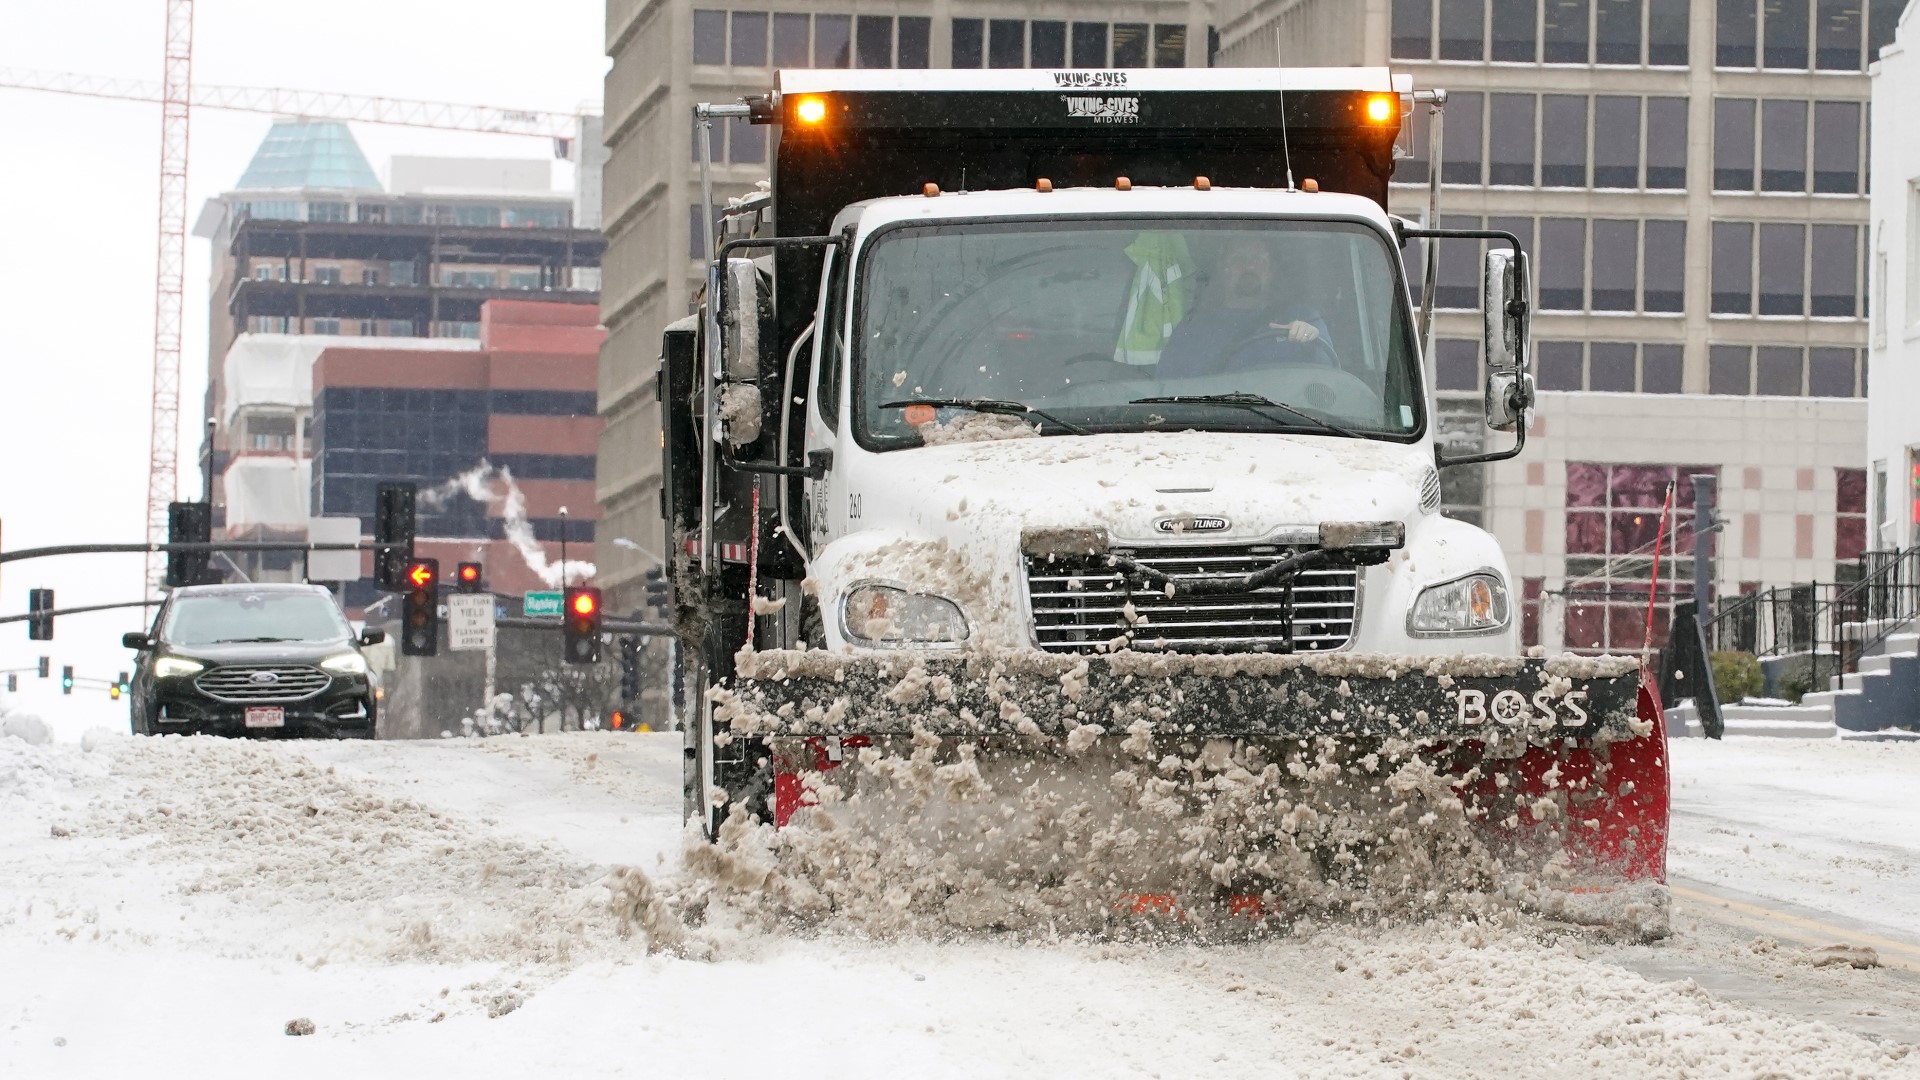 The City of St. Louis described the specifics of the winter storm and the plan to plow snow. The morning rush hour was expected to be messy.